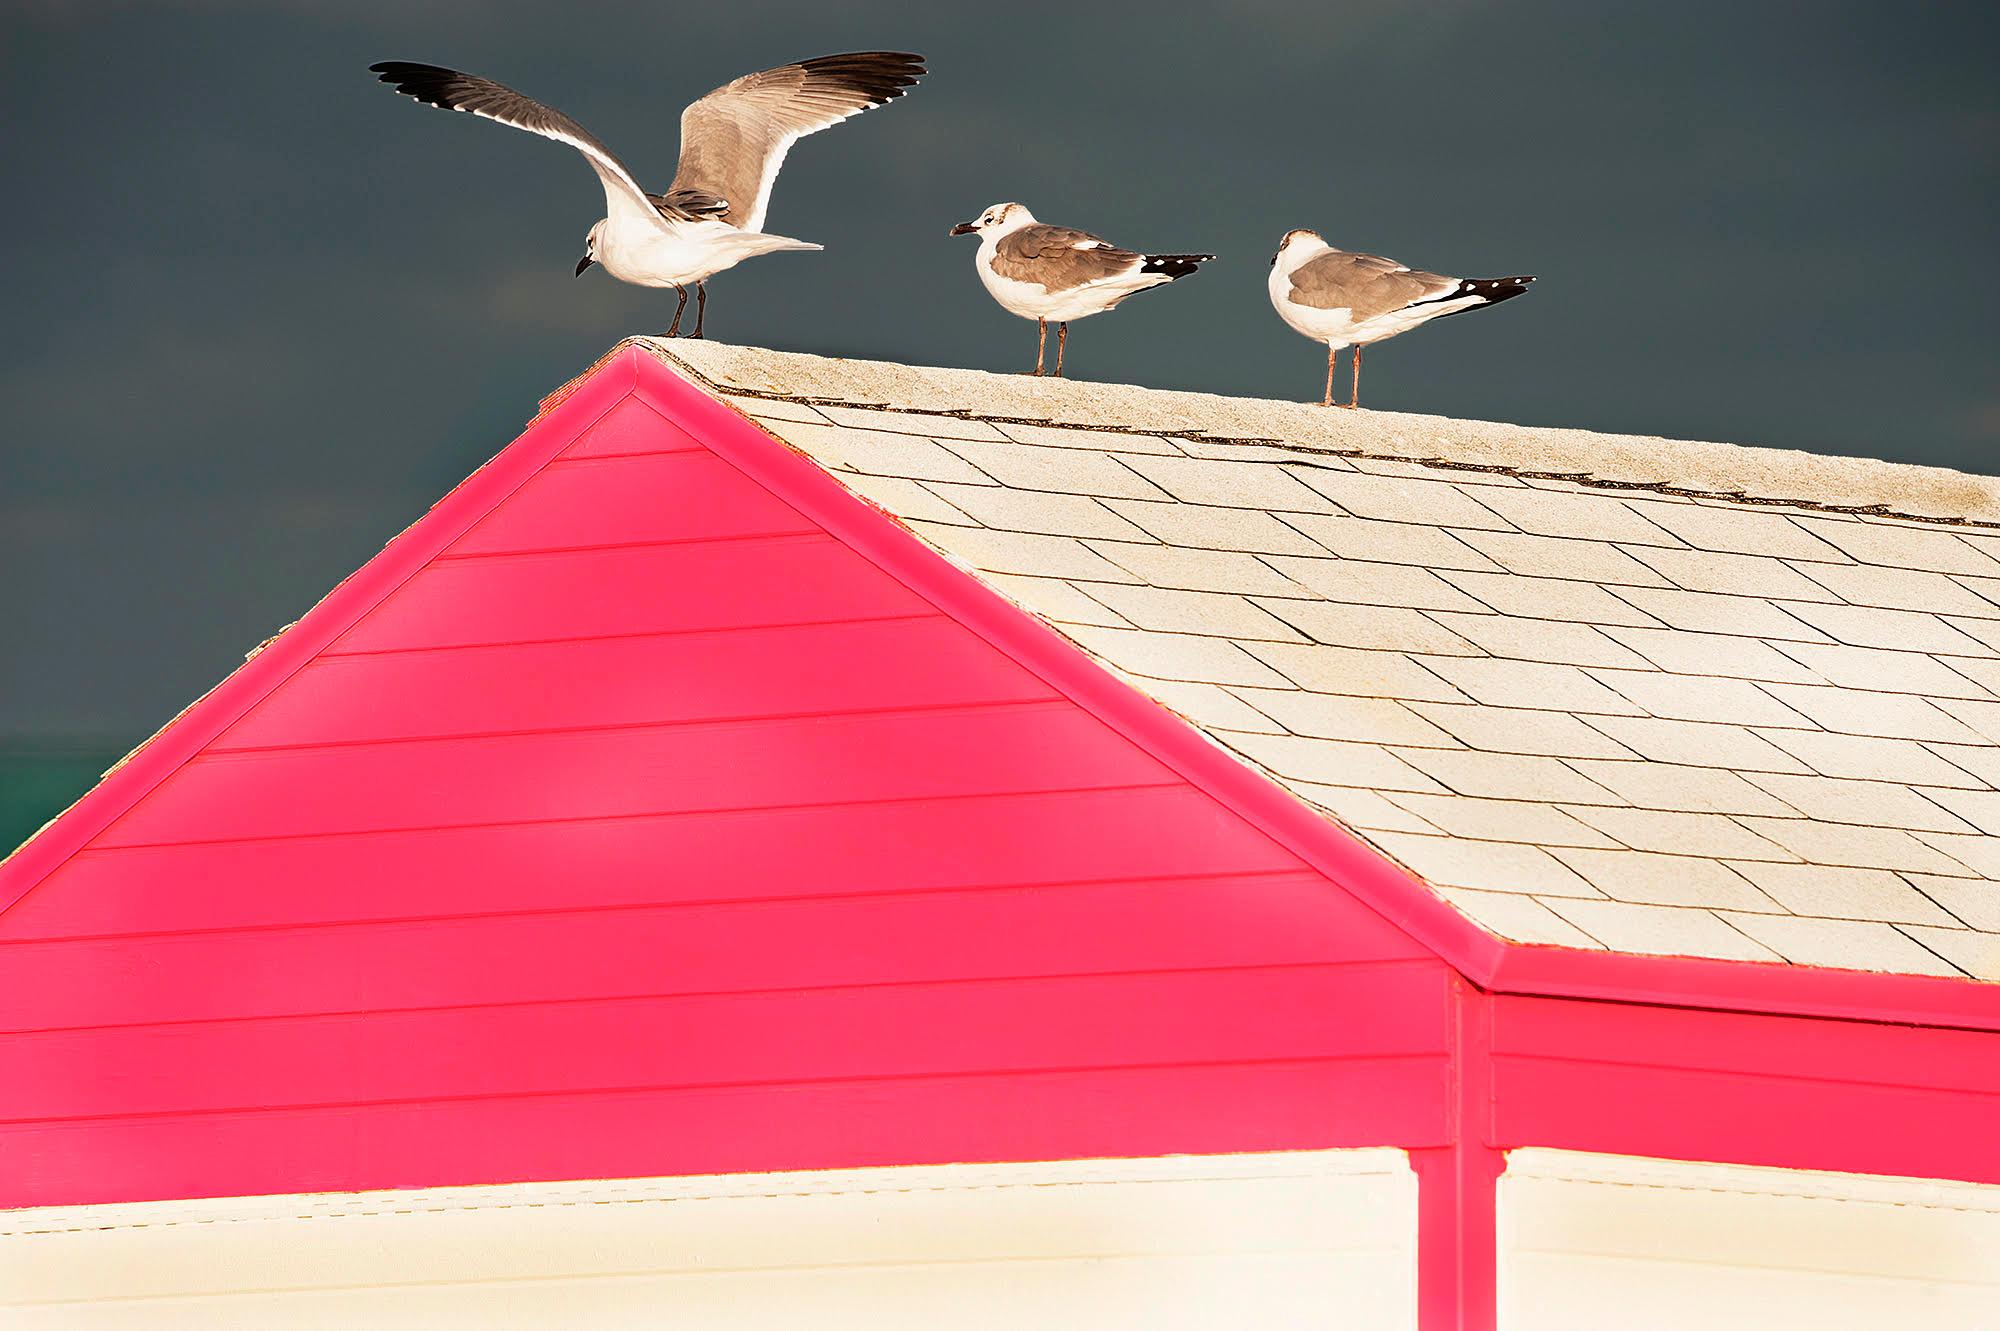 Joyful Birds on Roof of a Pink, Summer Beach House East Hampton, Abstract Photo - Photograph by Mitchell Funk